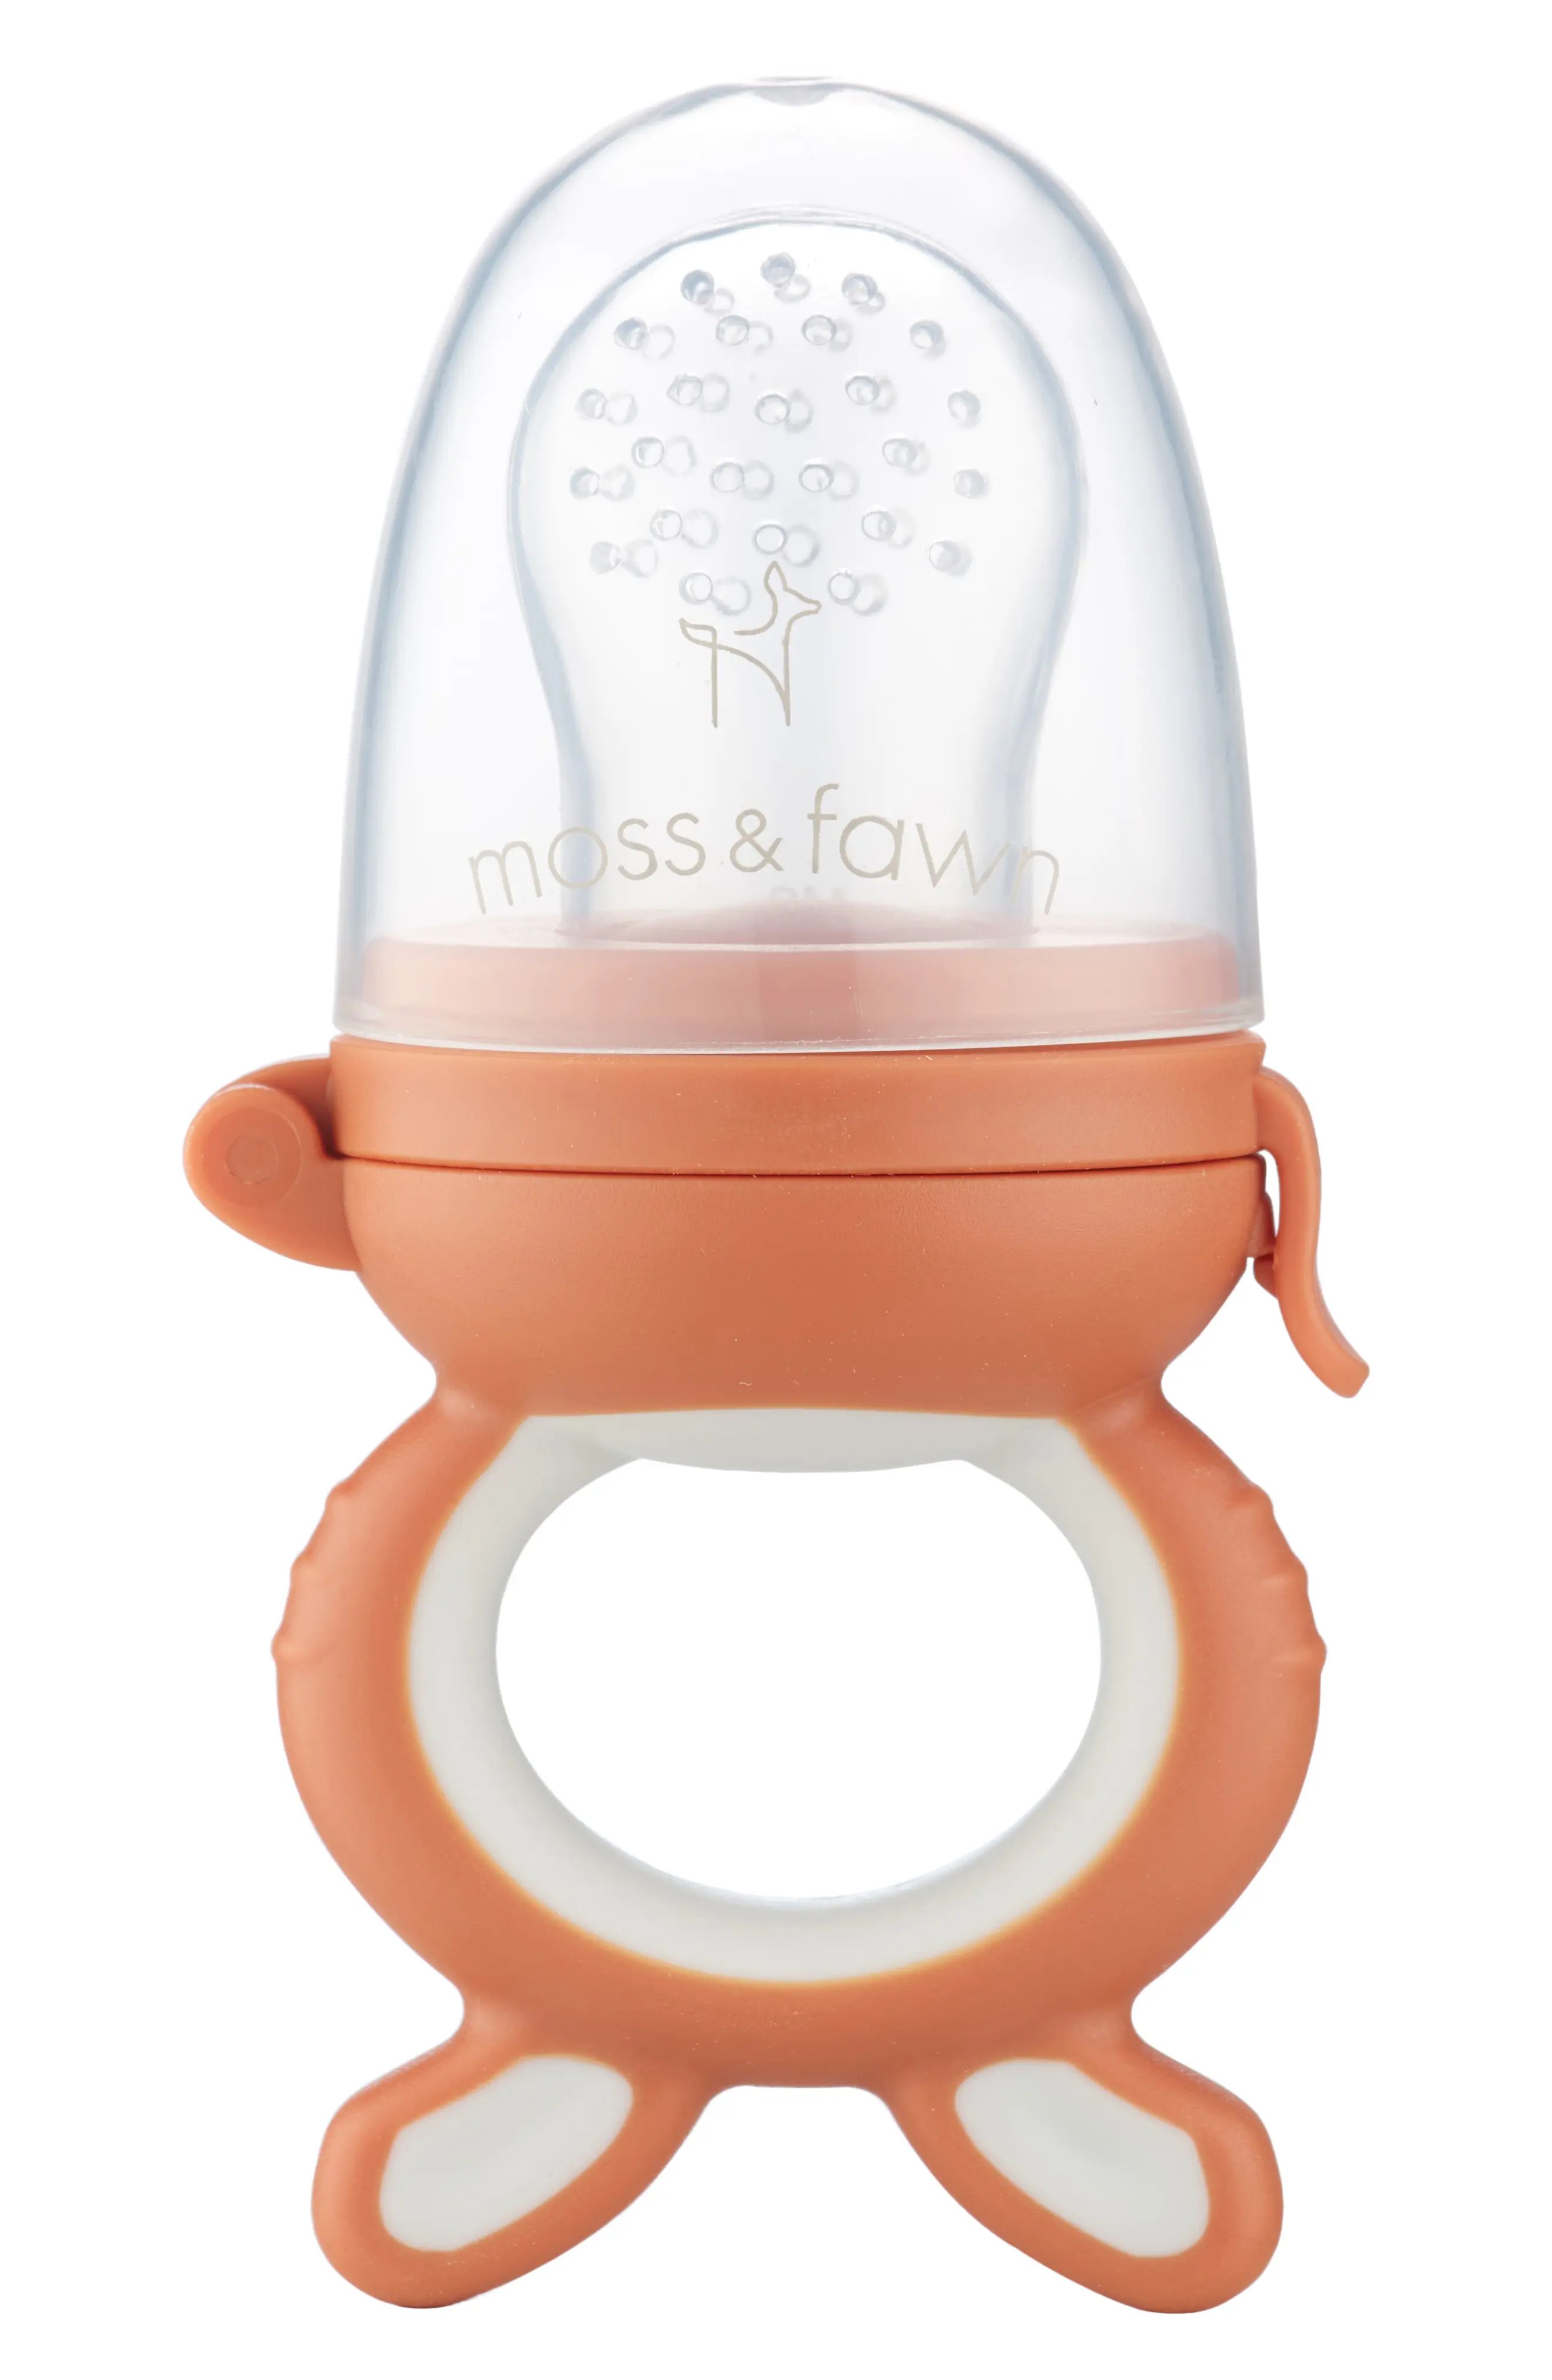 Moss & Fawn Forage Feeder in Terra Cotta at Nordstrom | Nordstrom